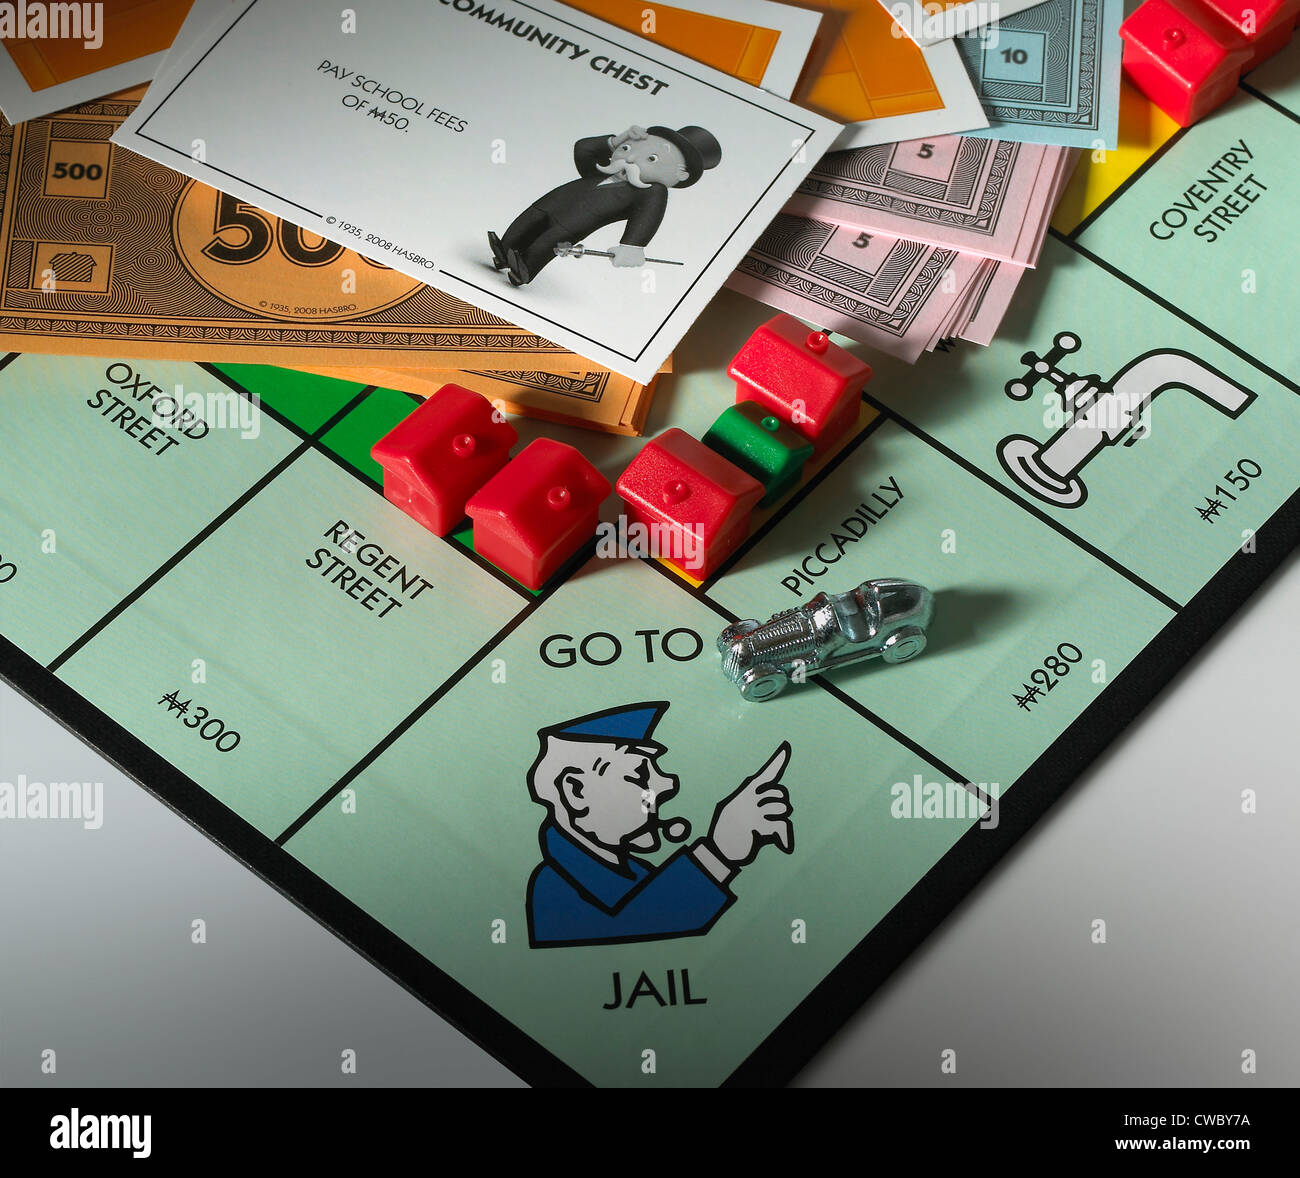 Monopoly board game Stock Photo